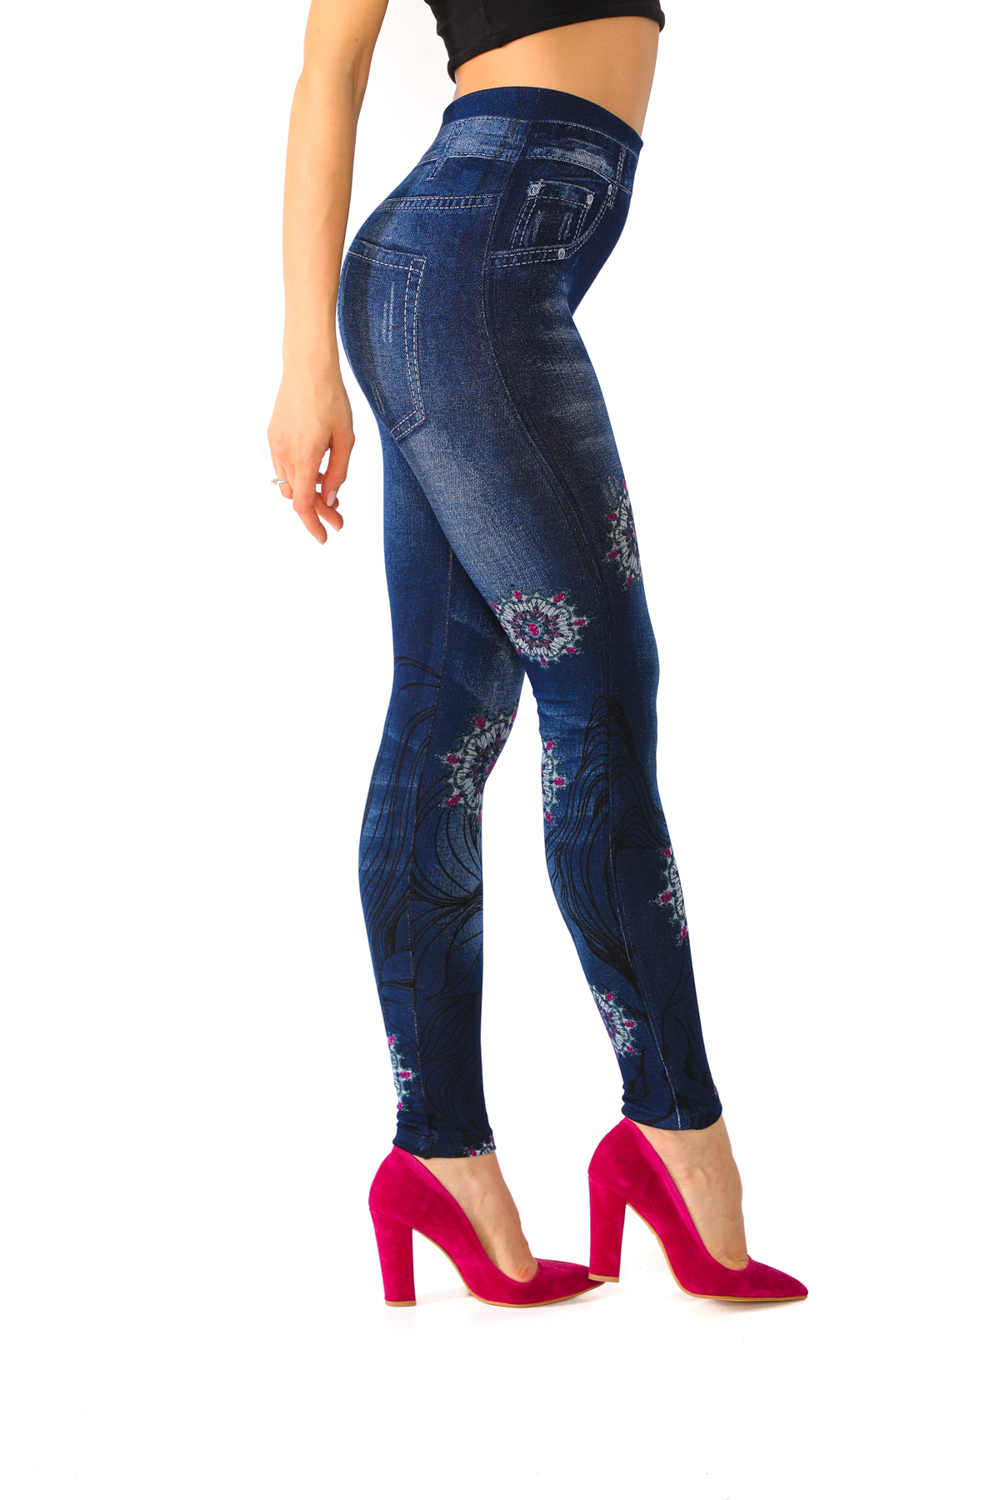 Timbre Free Denim Style Jeggings at Rs 150 in Mohali | ID: 18248081633